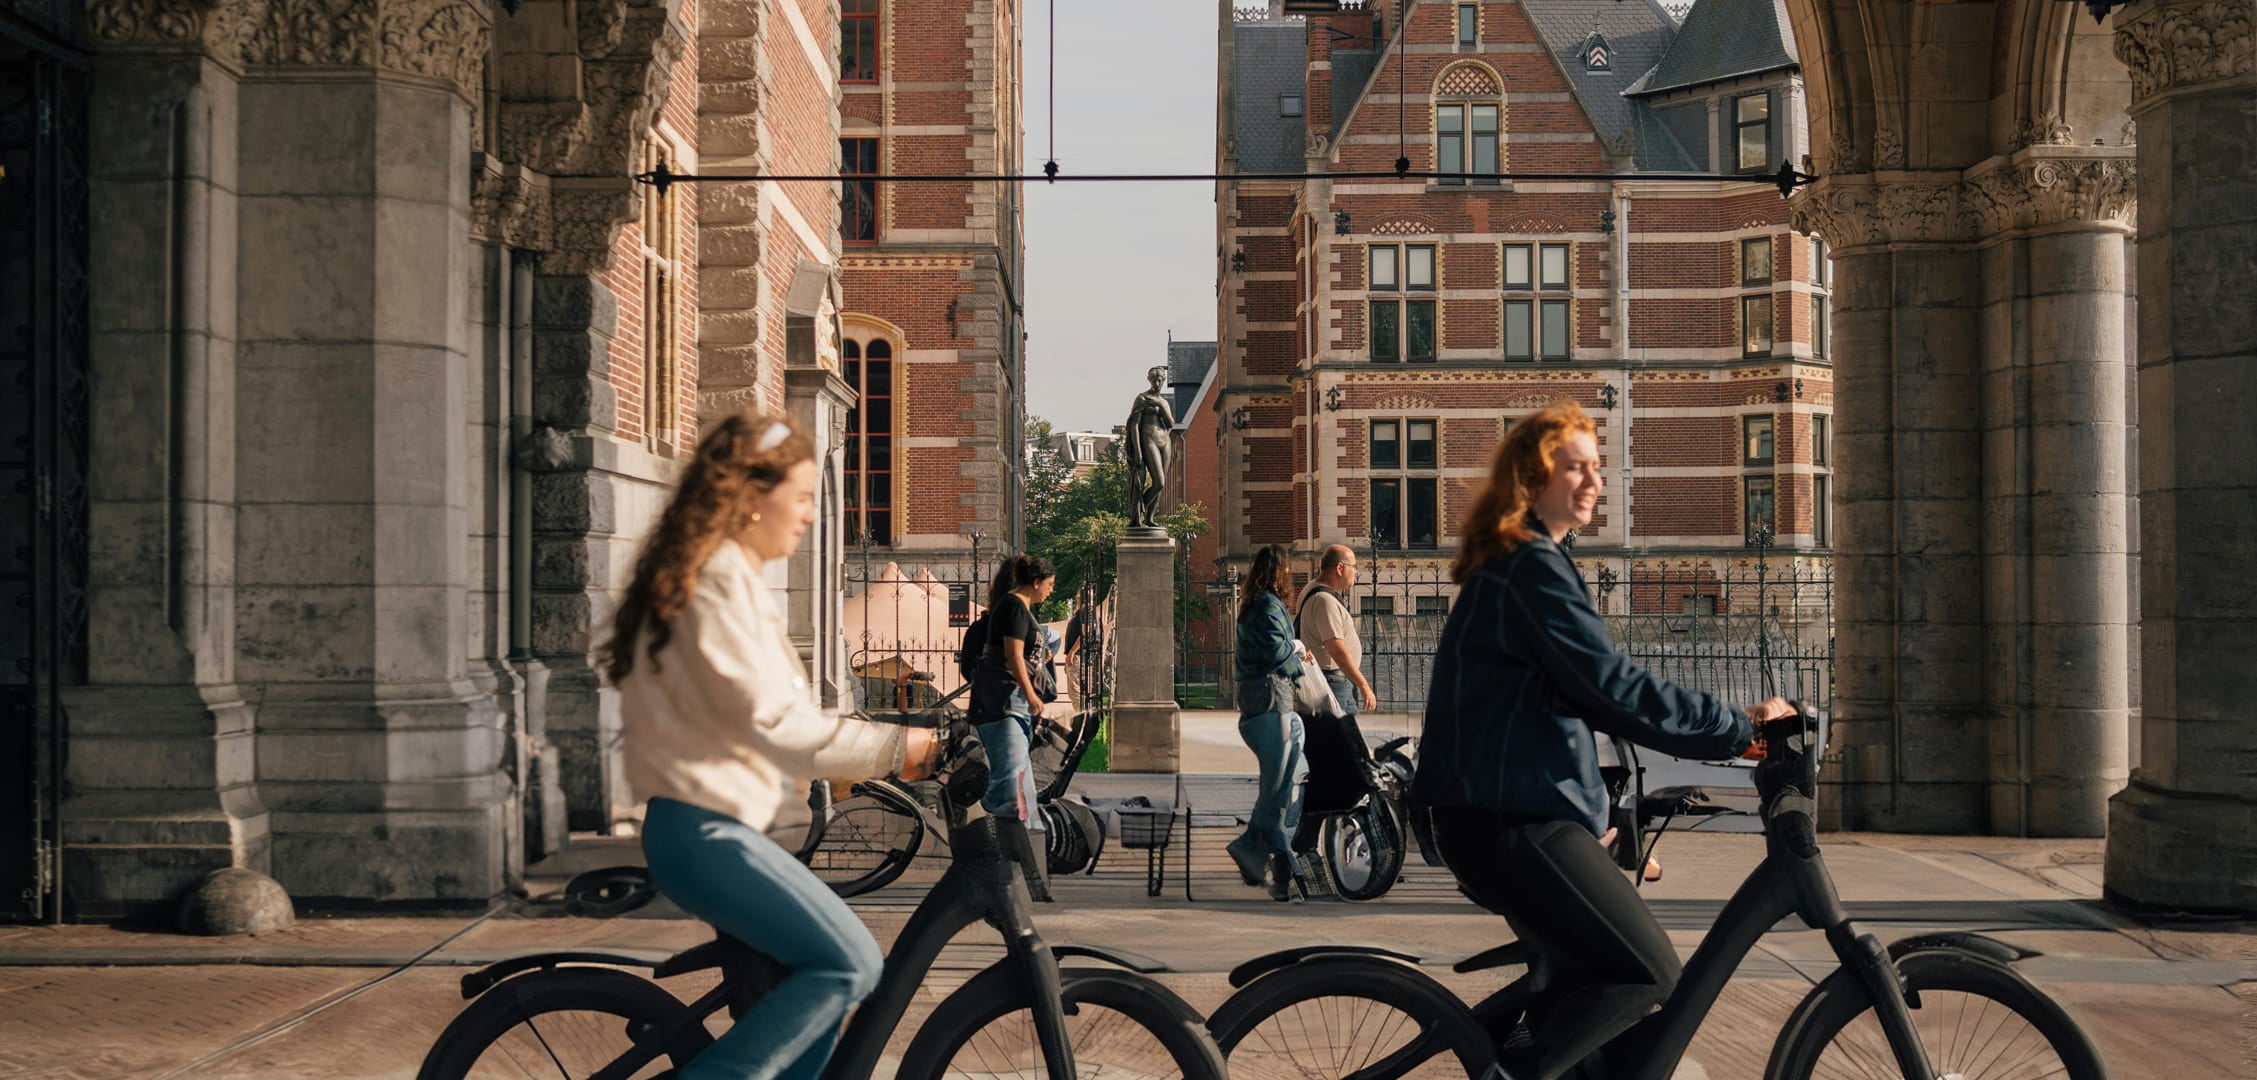 Amsterdam Trials Remote Speed Control for E-Bikes to Enhance Safety